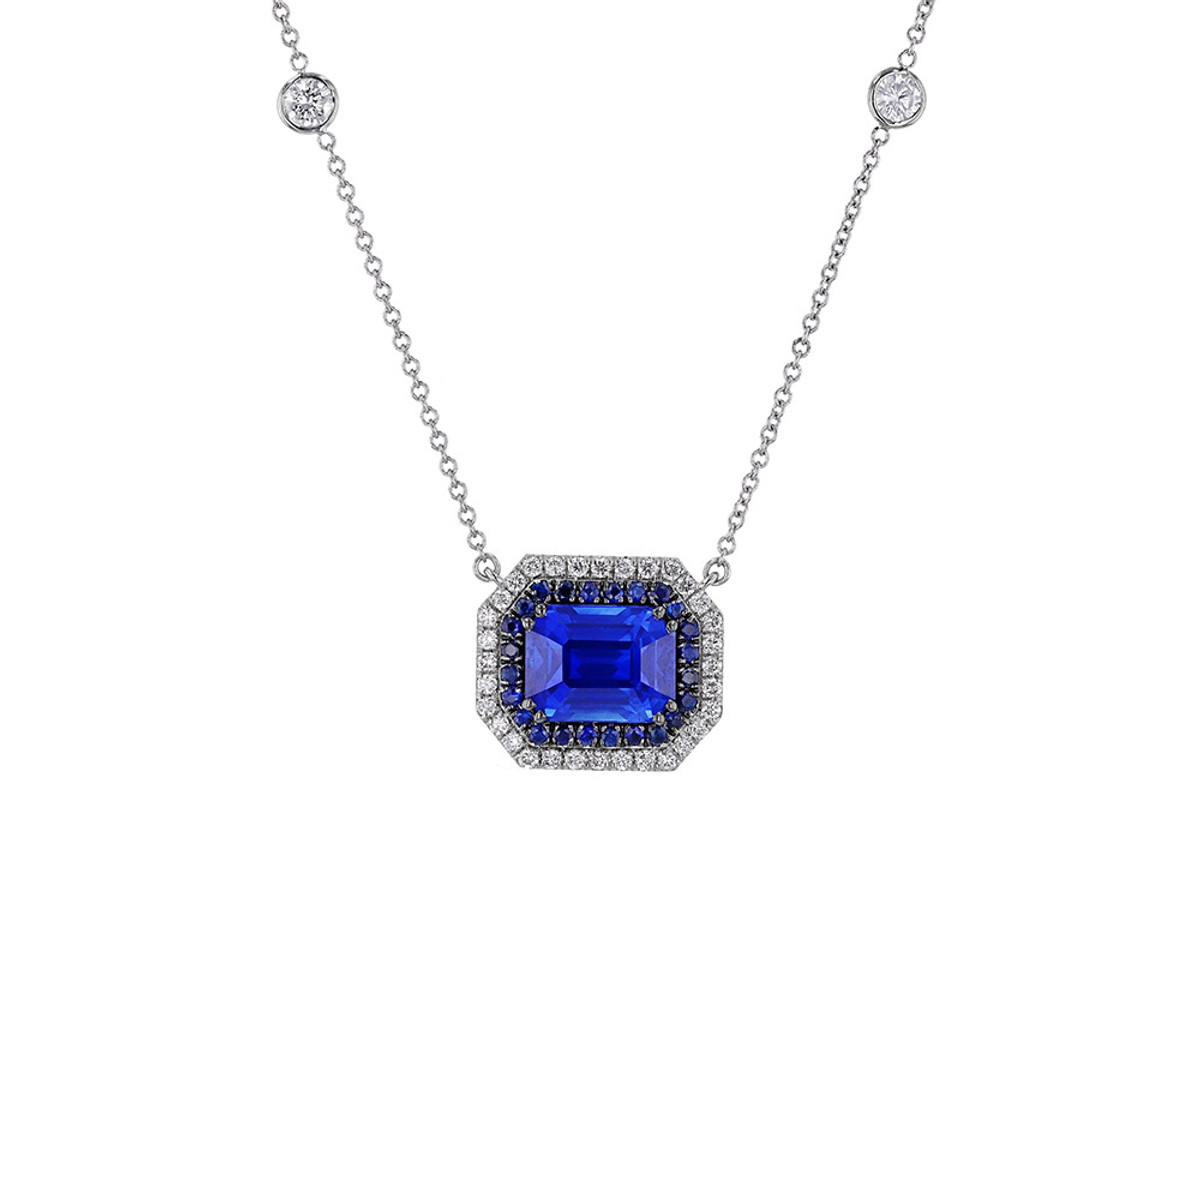 Hyde Park Collection 18 K White Gold Sapphire and Diamond Halo Pendant-58002 Product Image